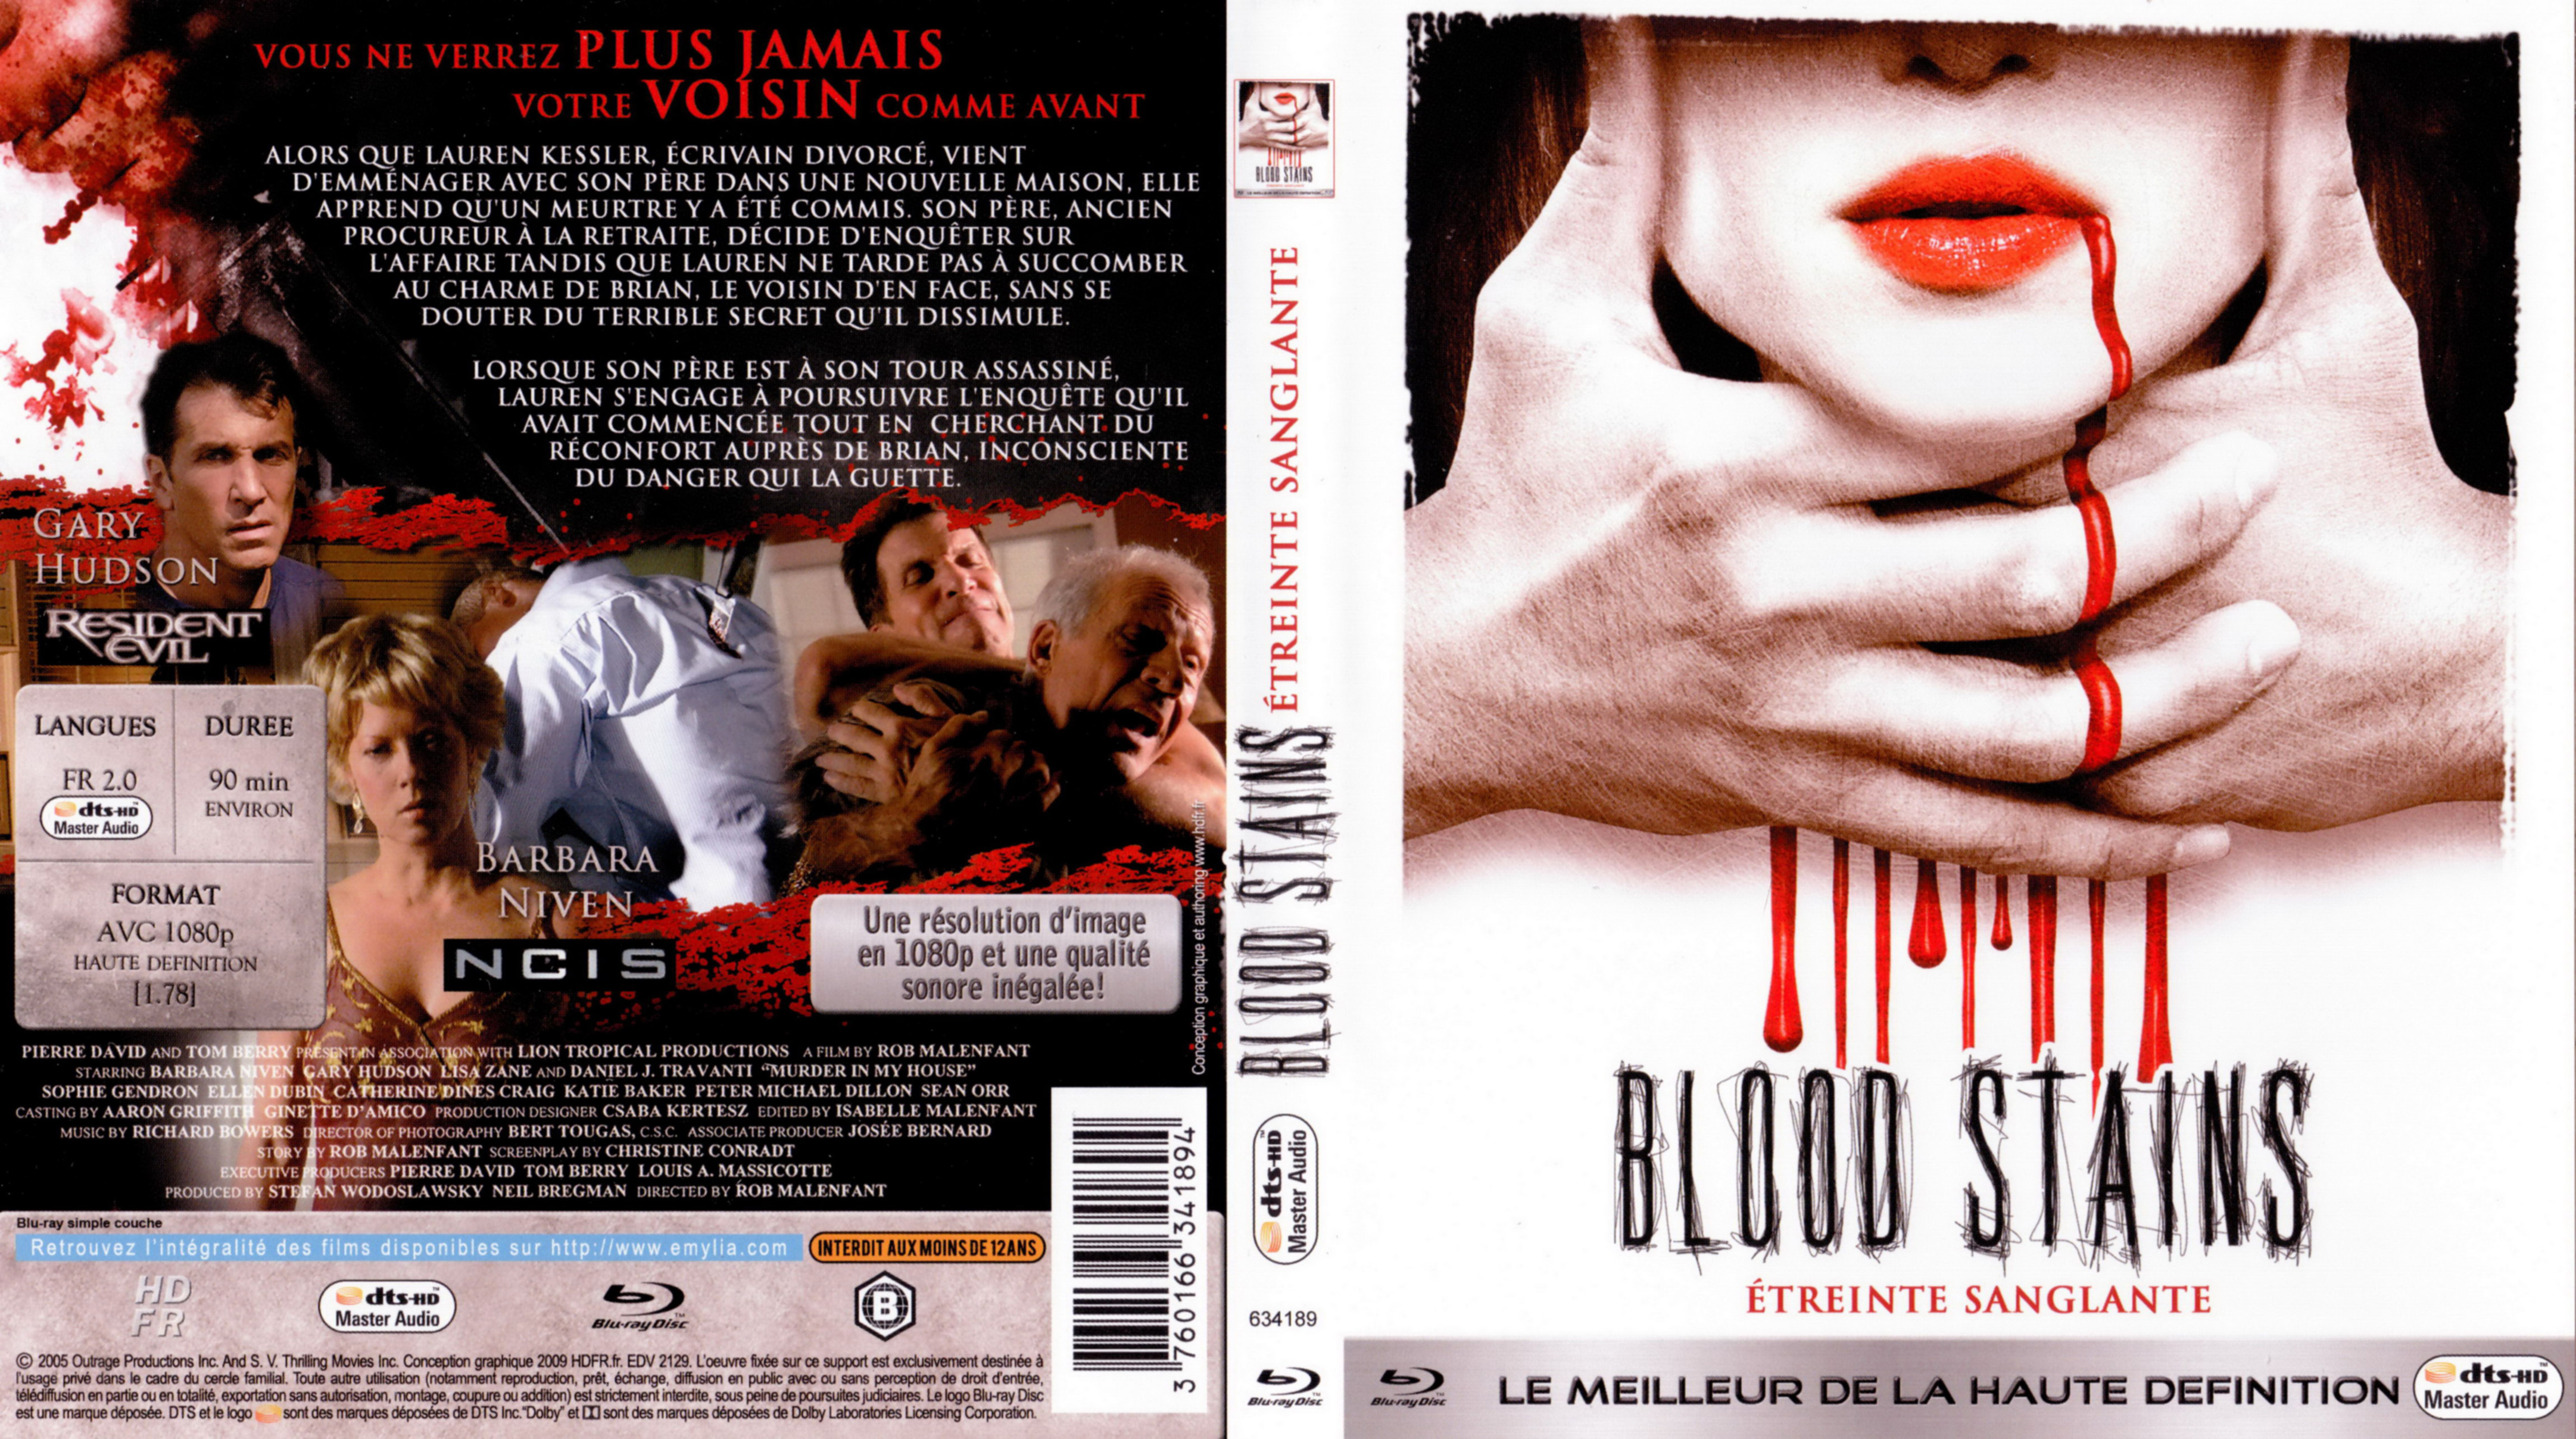 Jaquette DVD Blood stains (BLU-RAY)